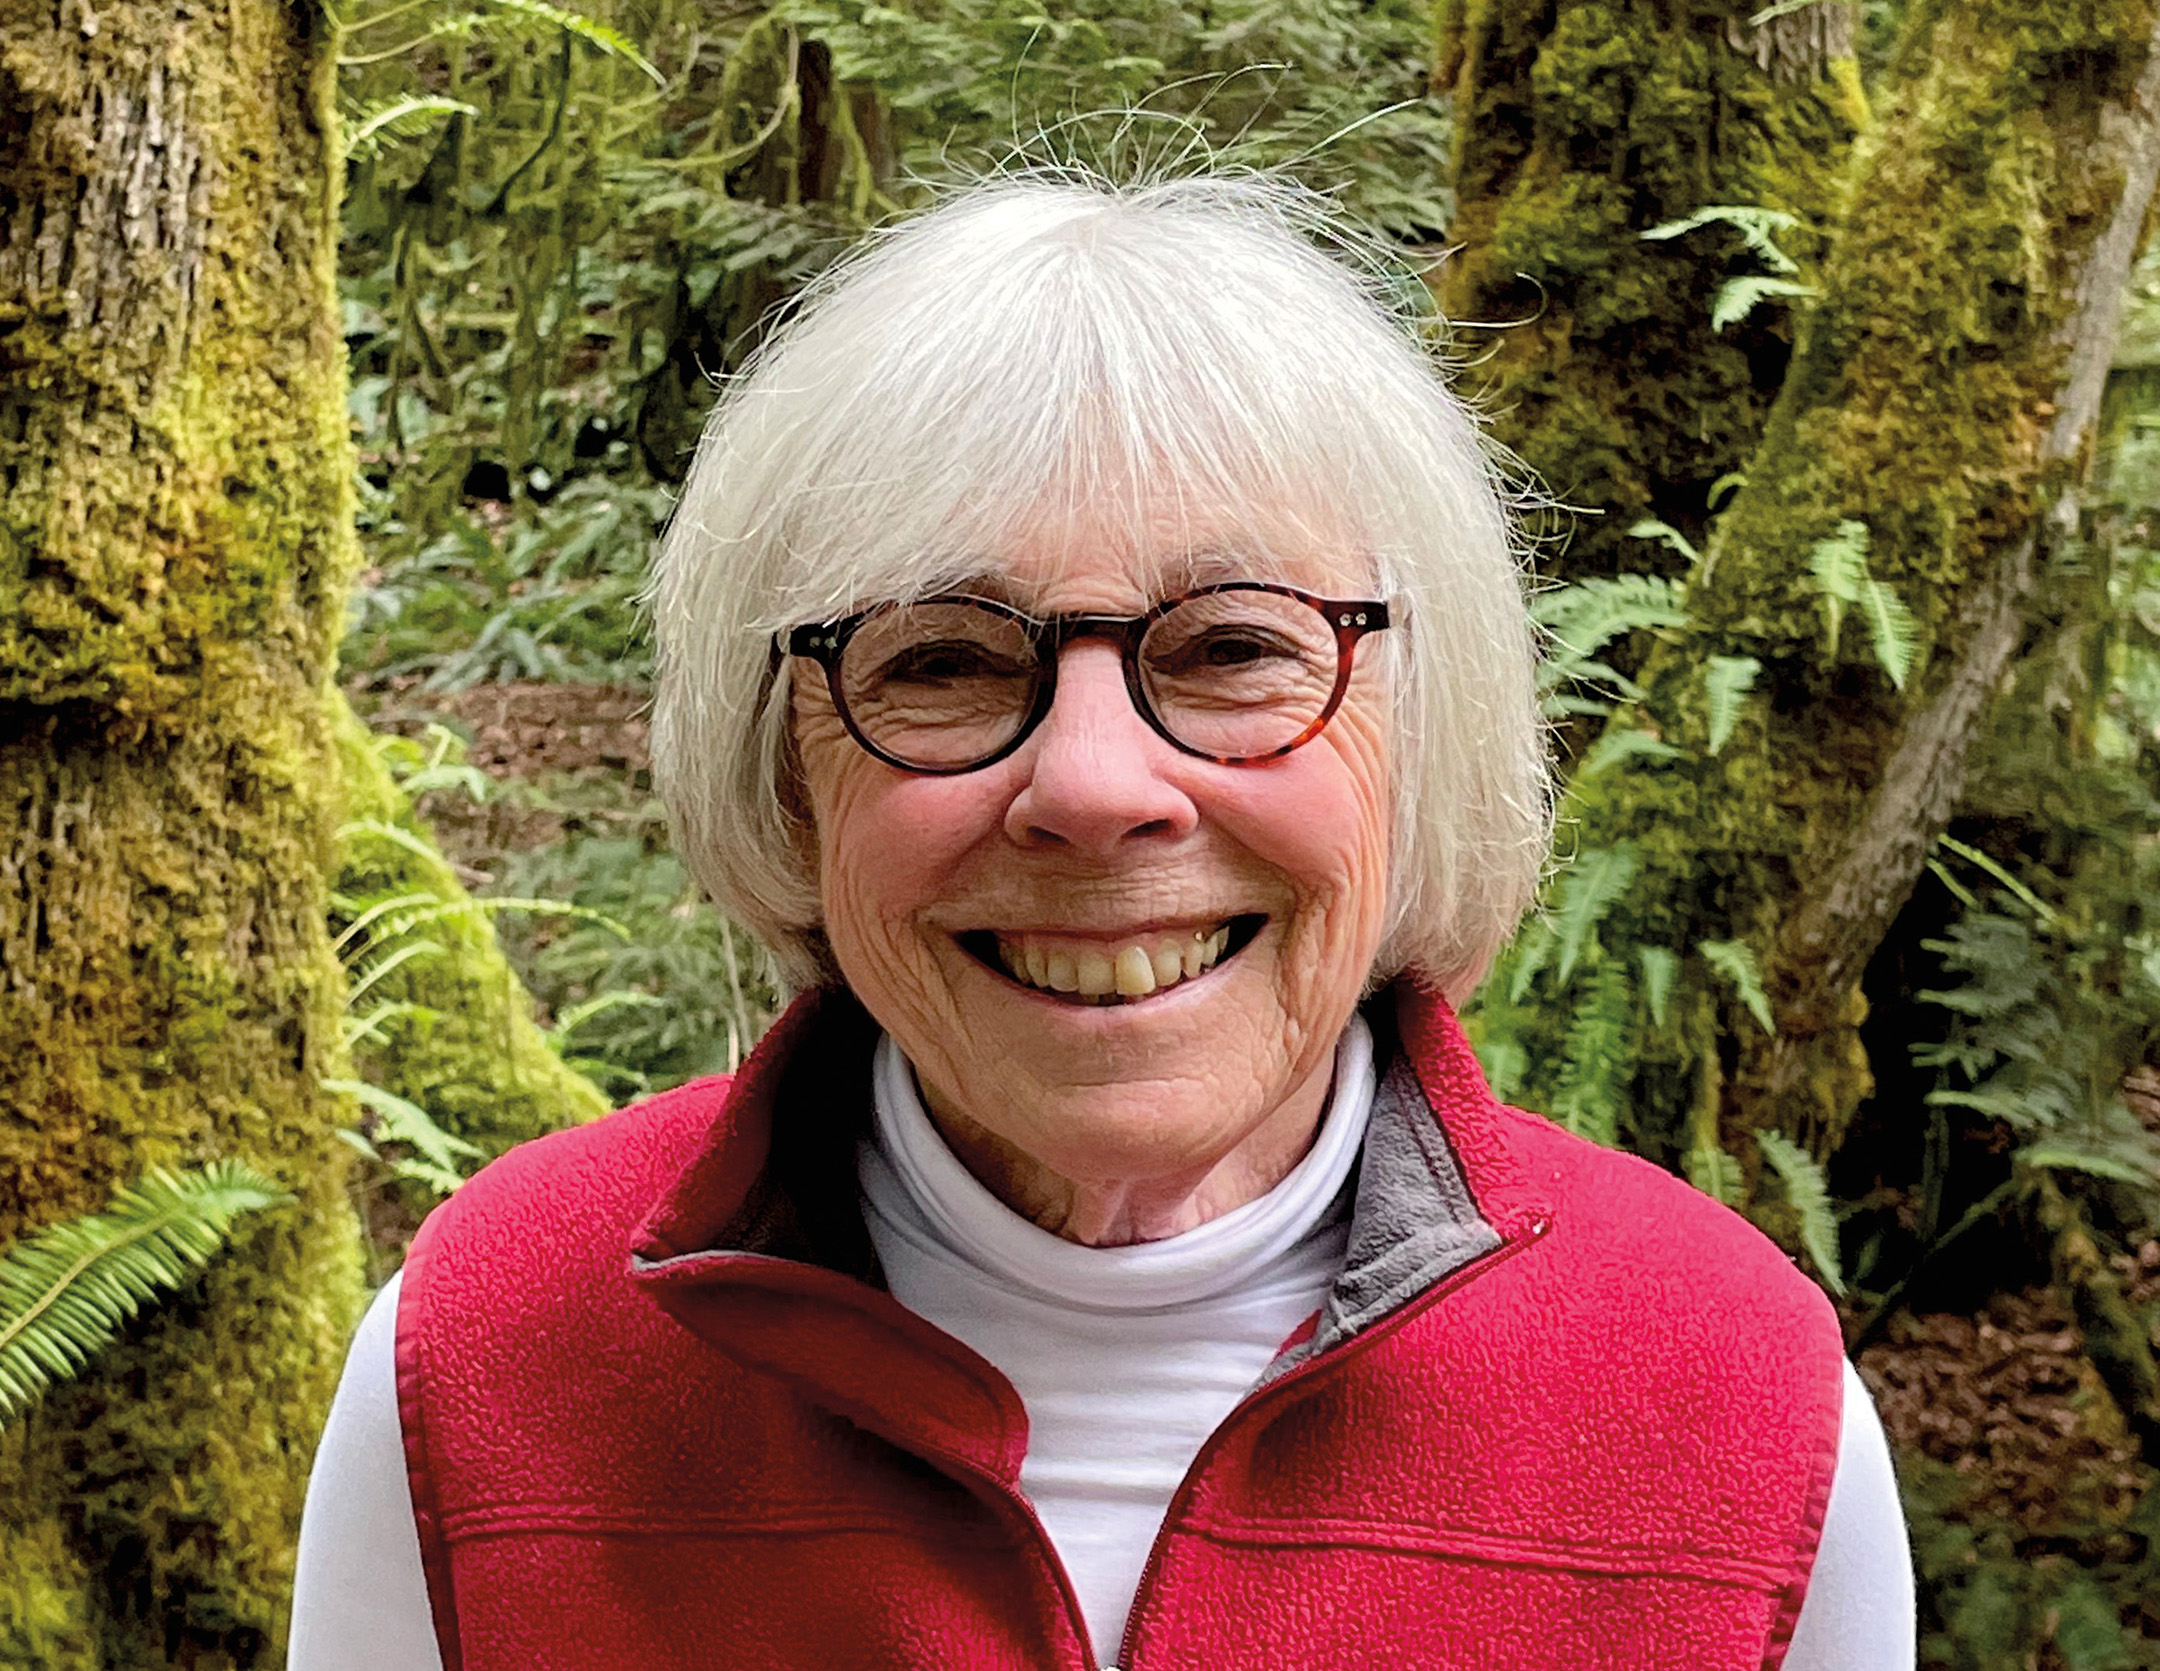 Melody Mackey Allen, Xerces Society executive director, 1984 to 2000. She has short grey hair, black-rimmed glasses, and a broad smile.